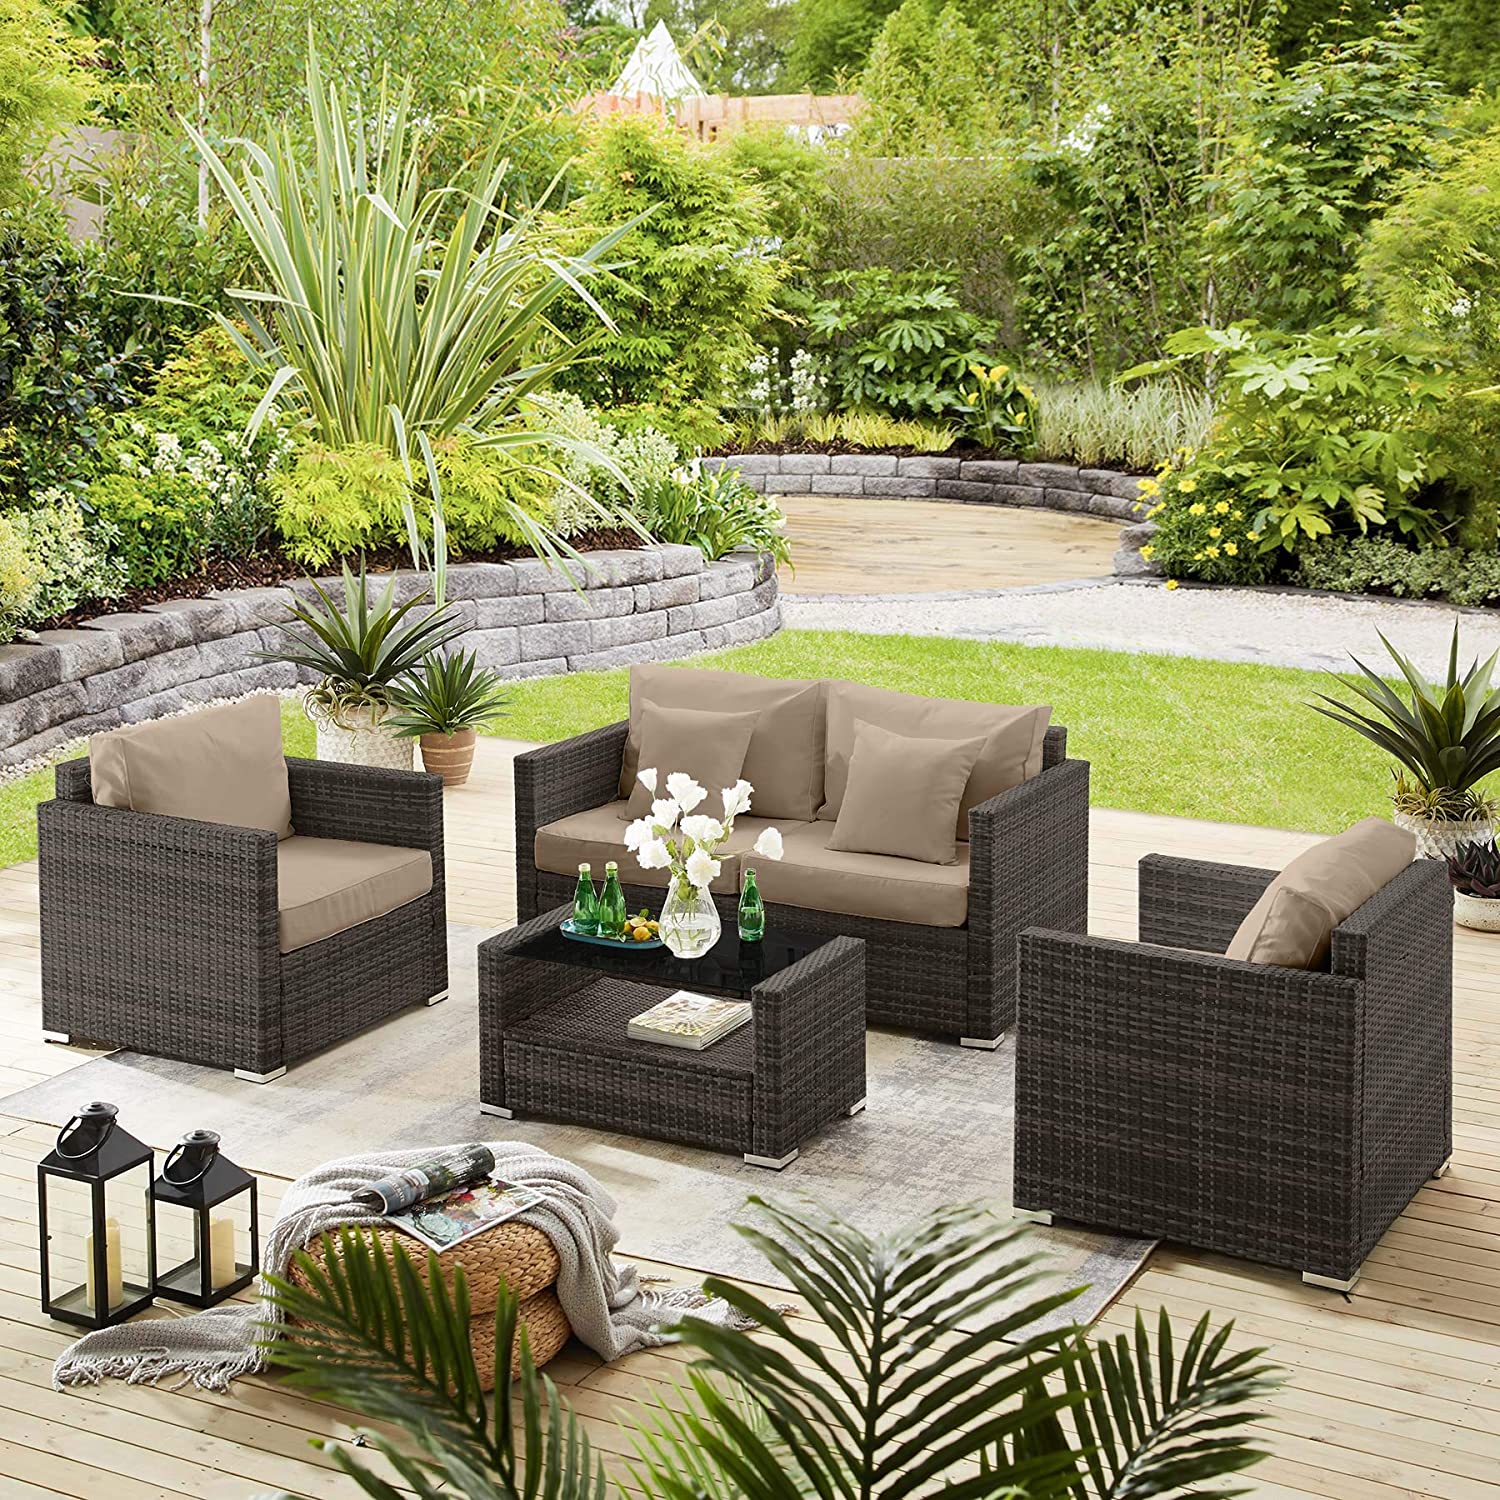 Details about   Tribesigns 5 Pcs Wicker Patio Outdoor Furniture Set Lounge Chair Ottoman & Table 